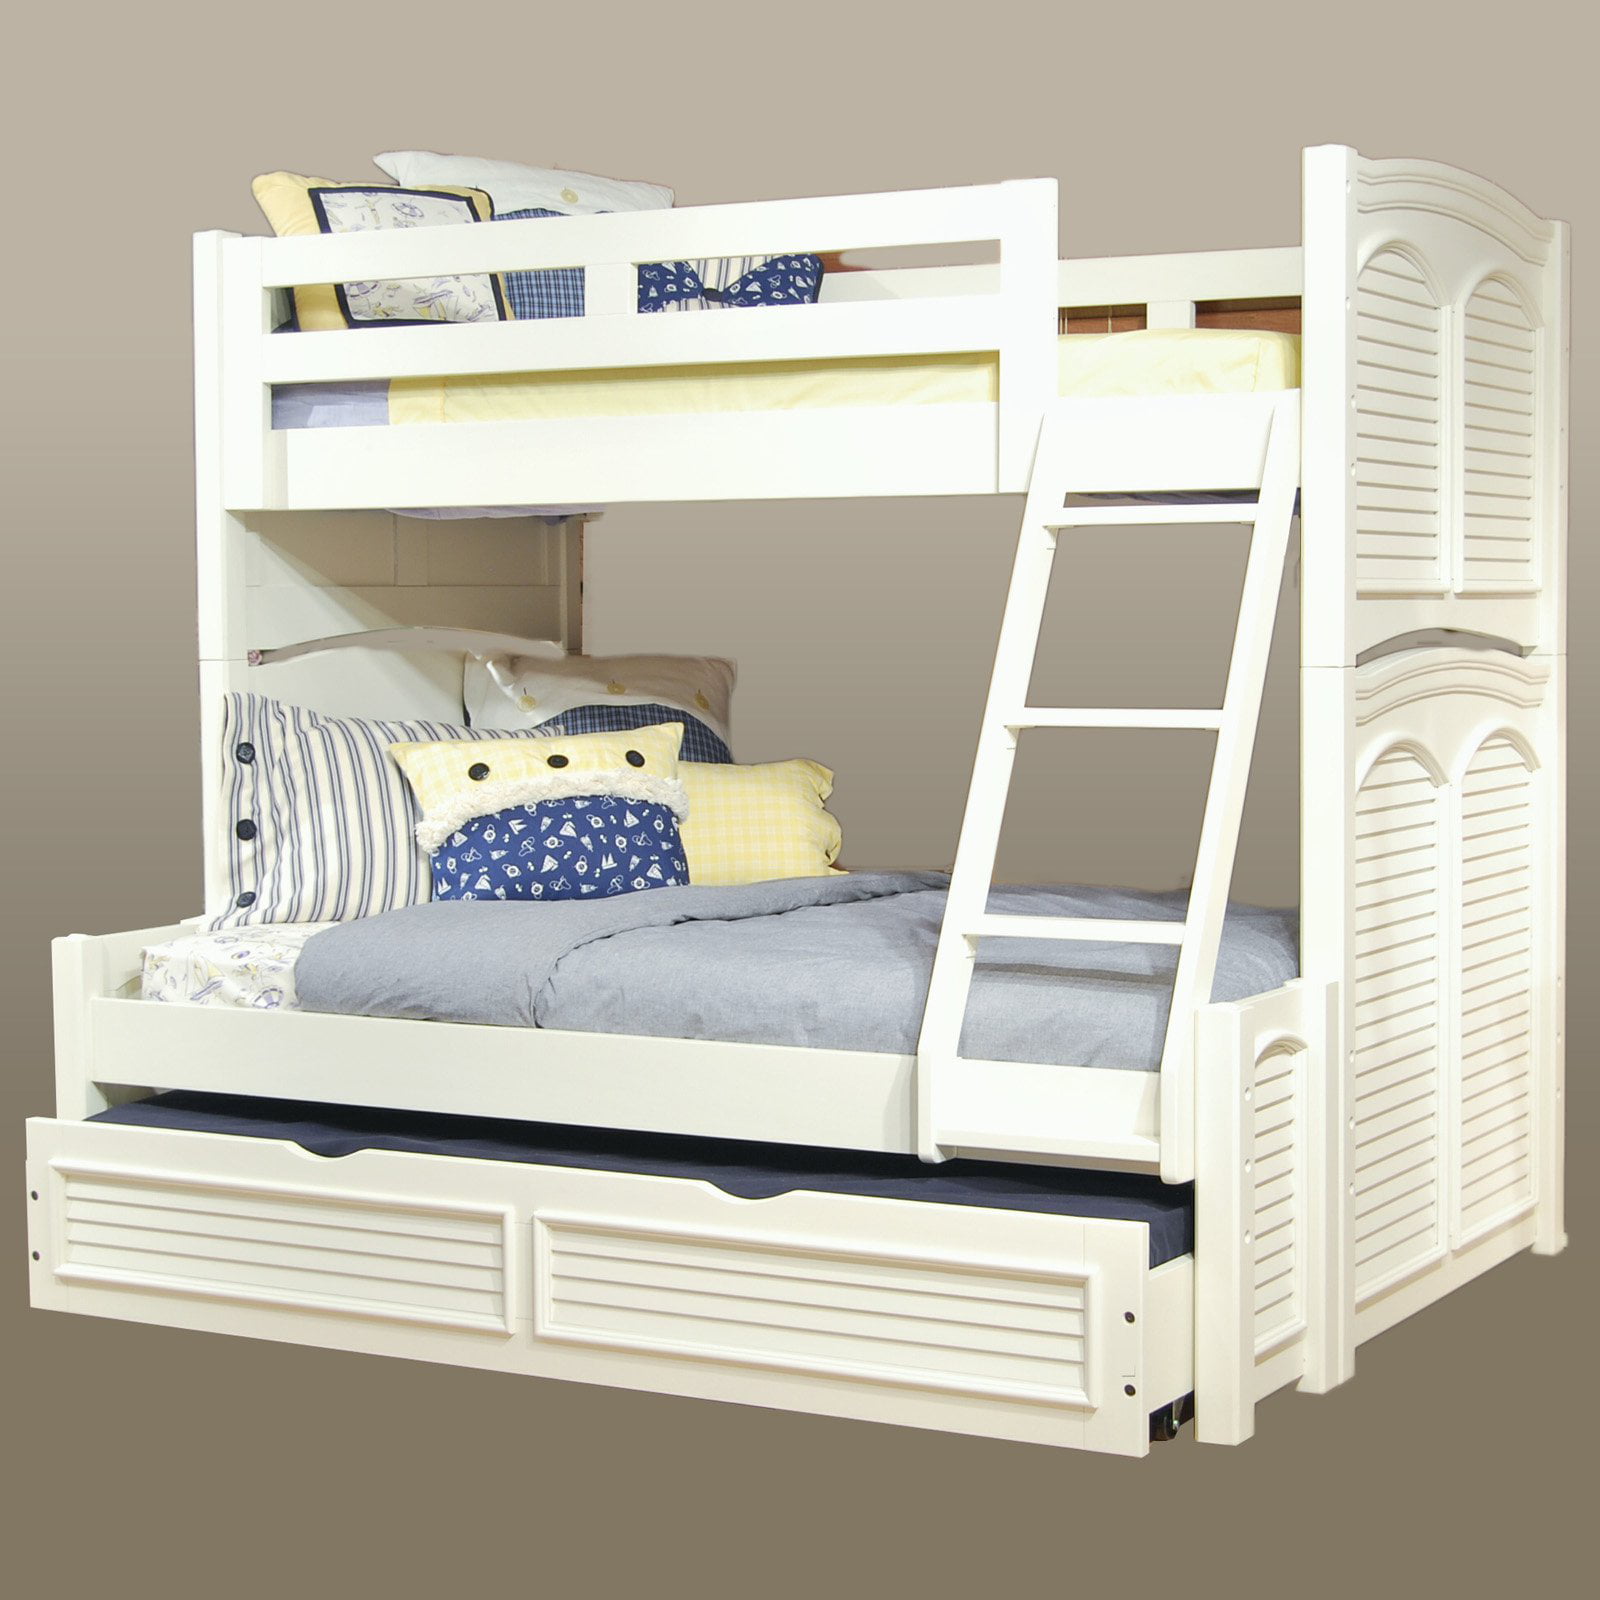 Full Bunk Bed Eggs White, American Freight Bunk Beds